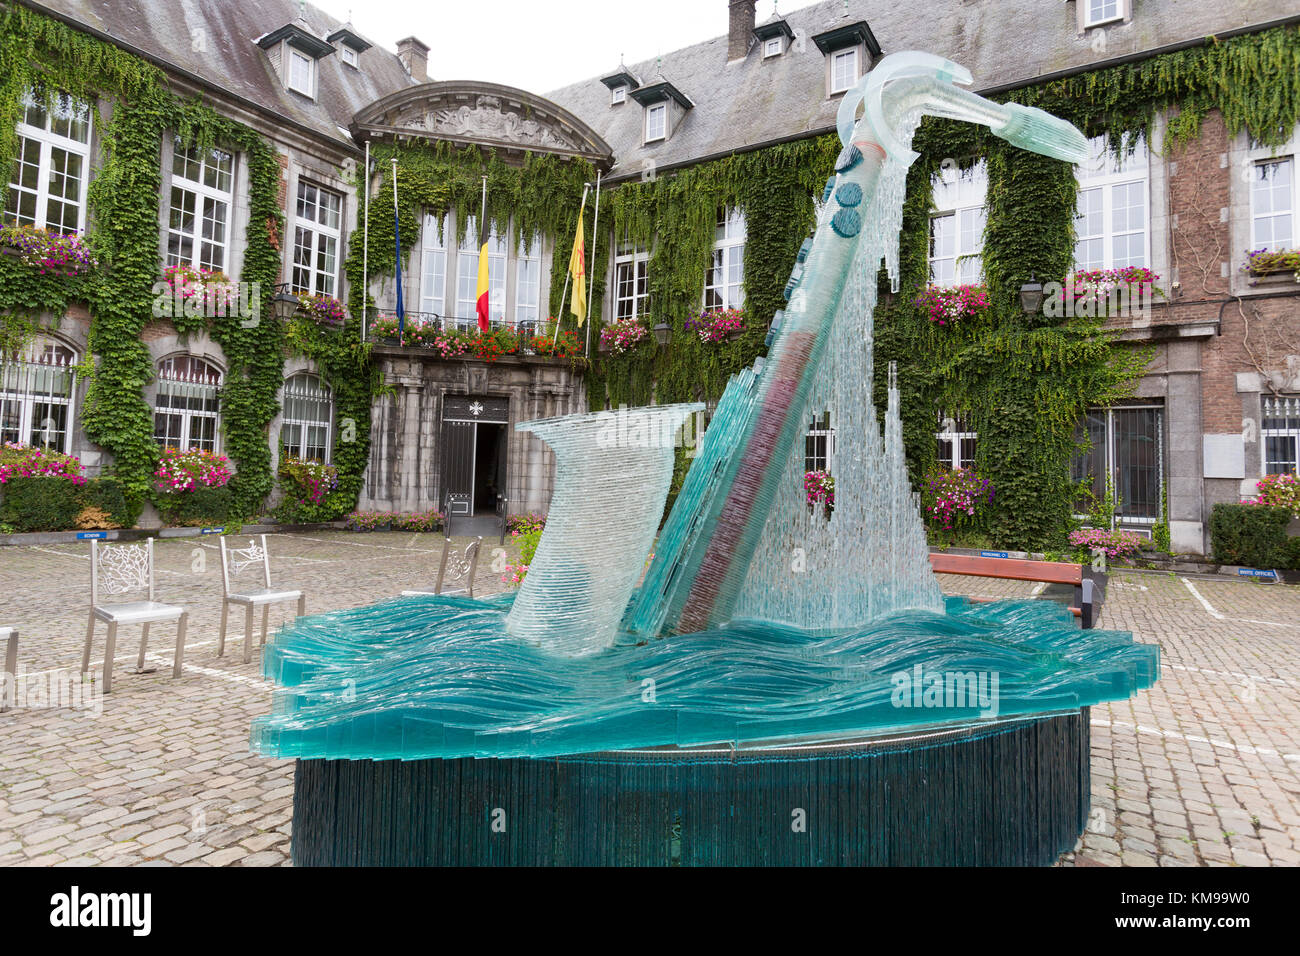 Town of Dinant, Belgium. Picturesque view of the Bernard Tirtiaux glass saxophone fountain sculpture, with Dinant Town Hall in the background. Stock Photo